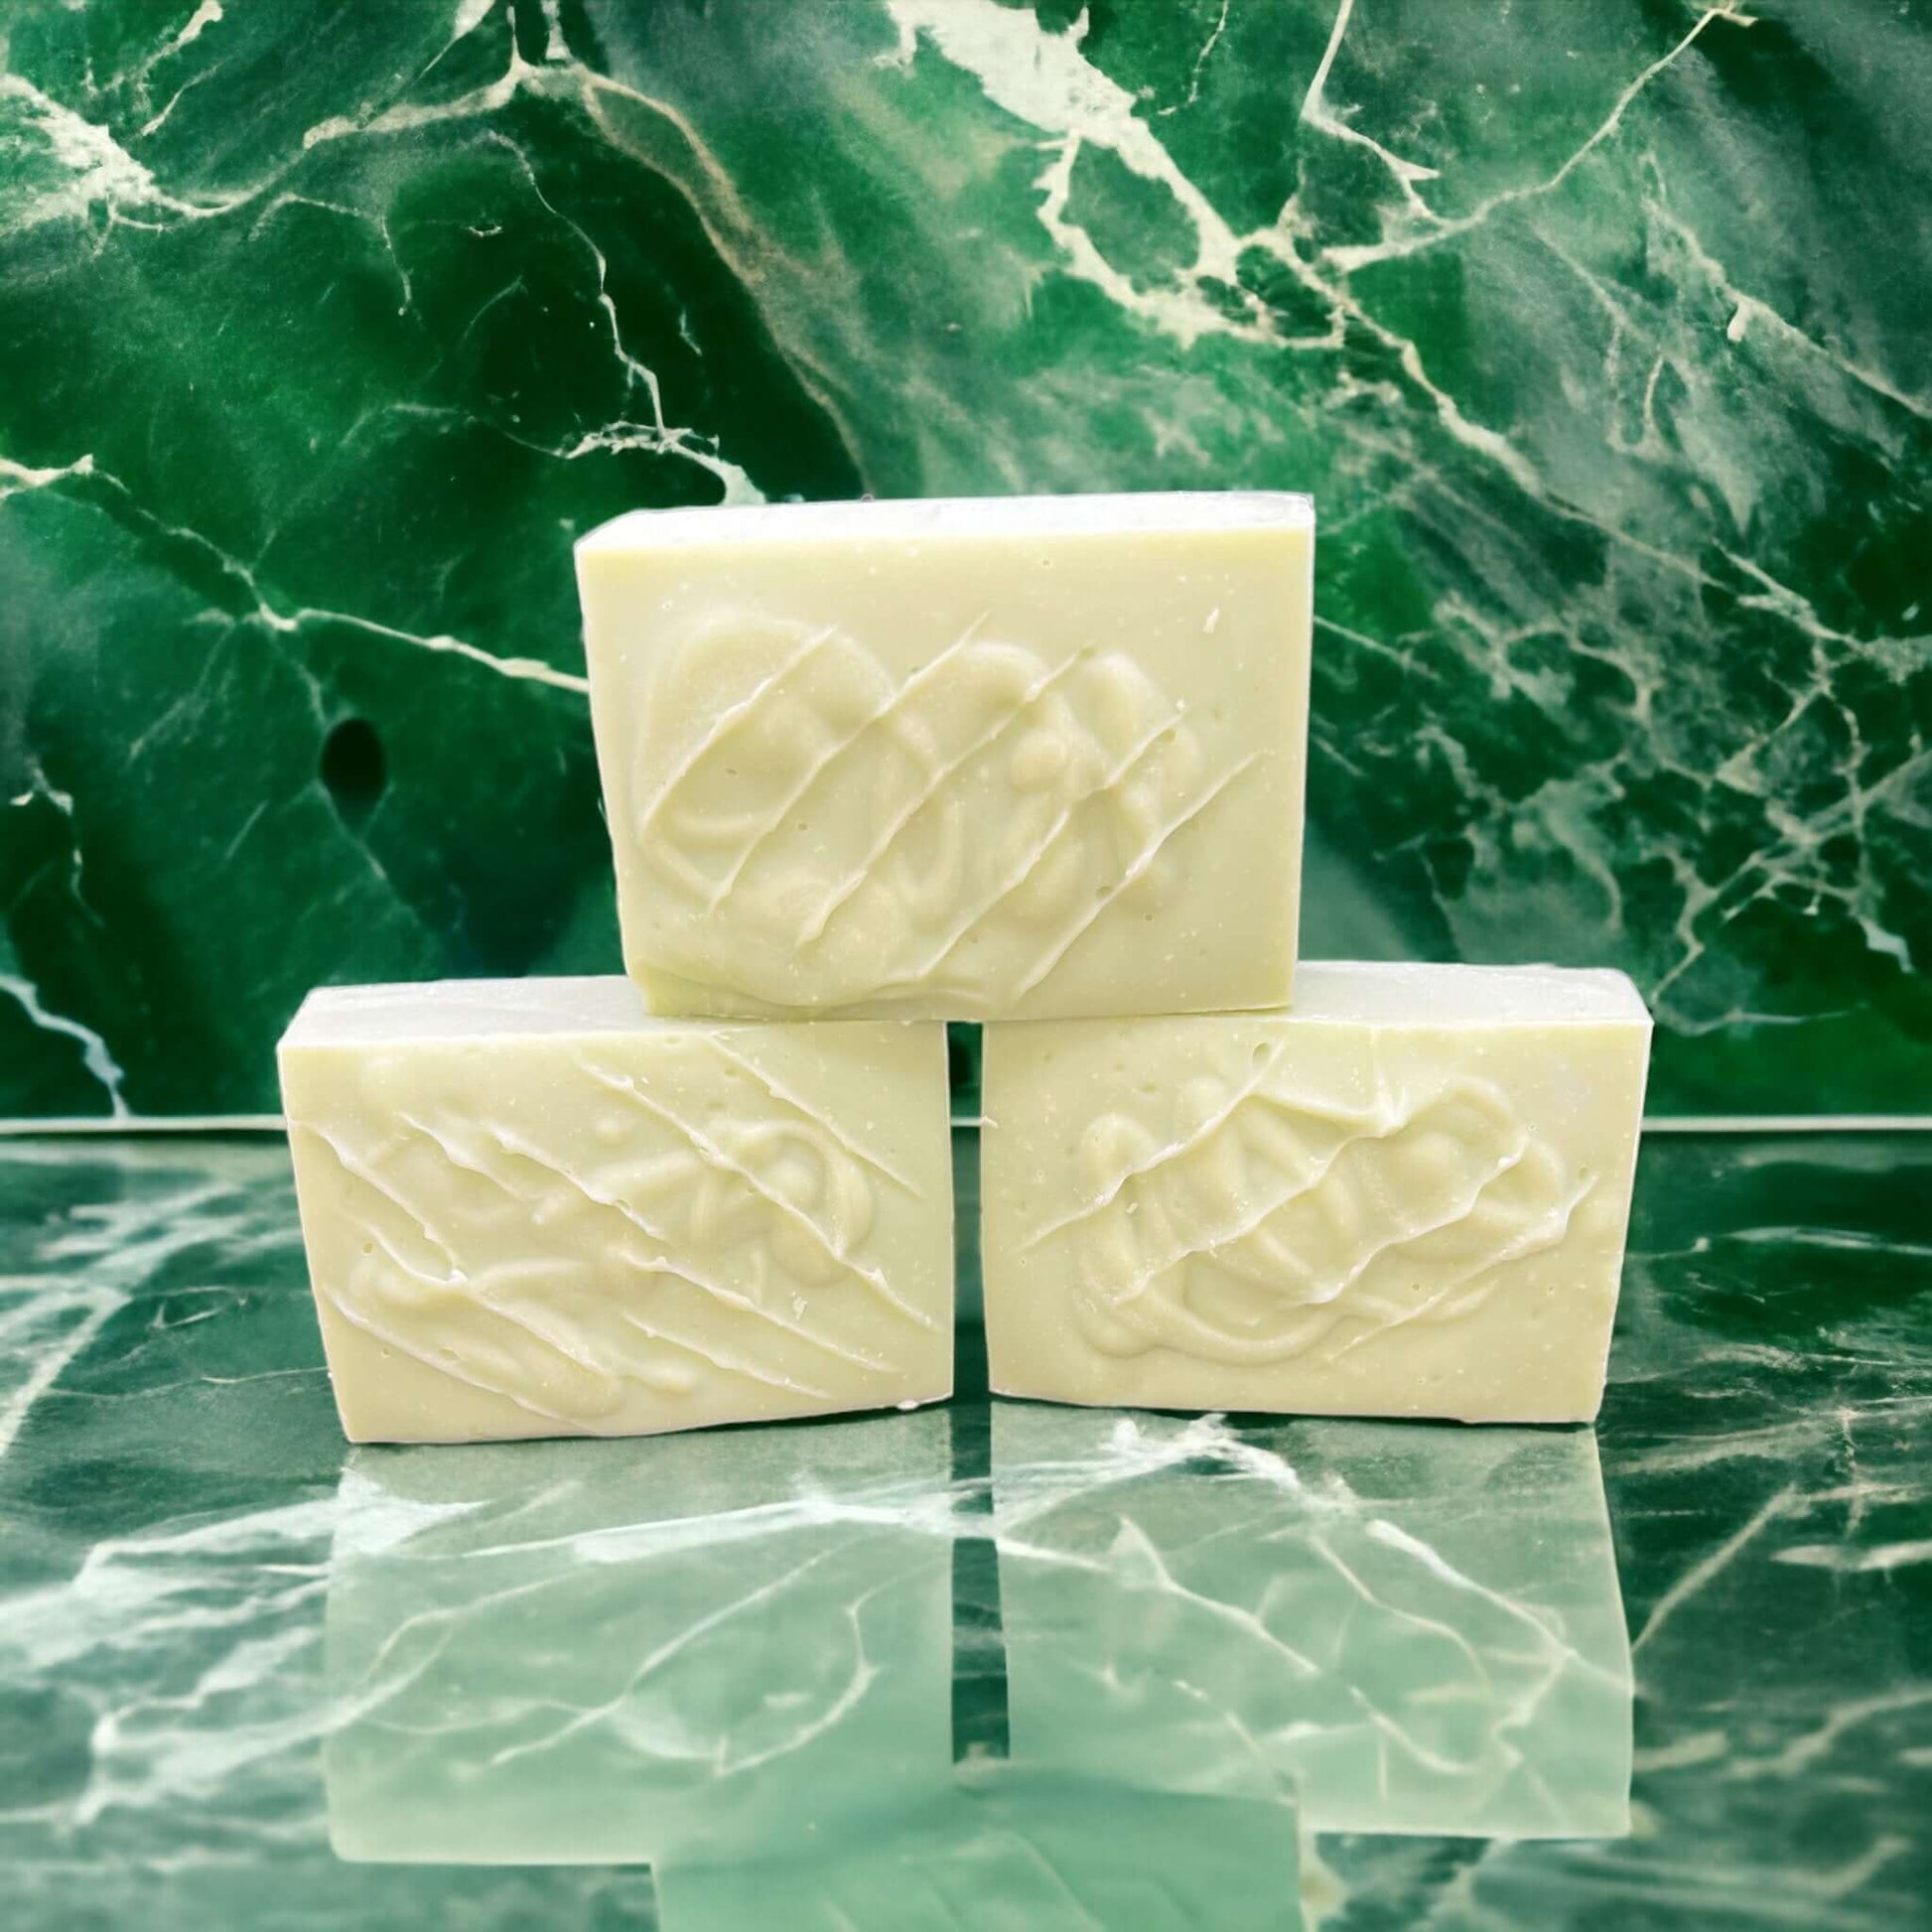 Handcrafted tallow soap bars with embossed design on a green marble surface, reflecting natural artisanal skincare